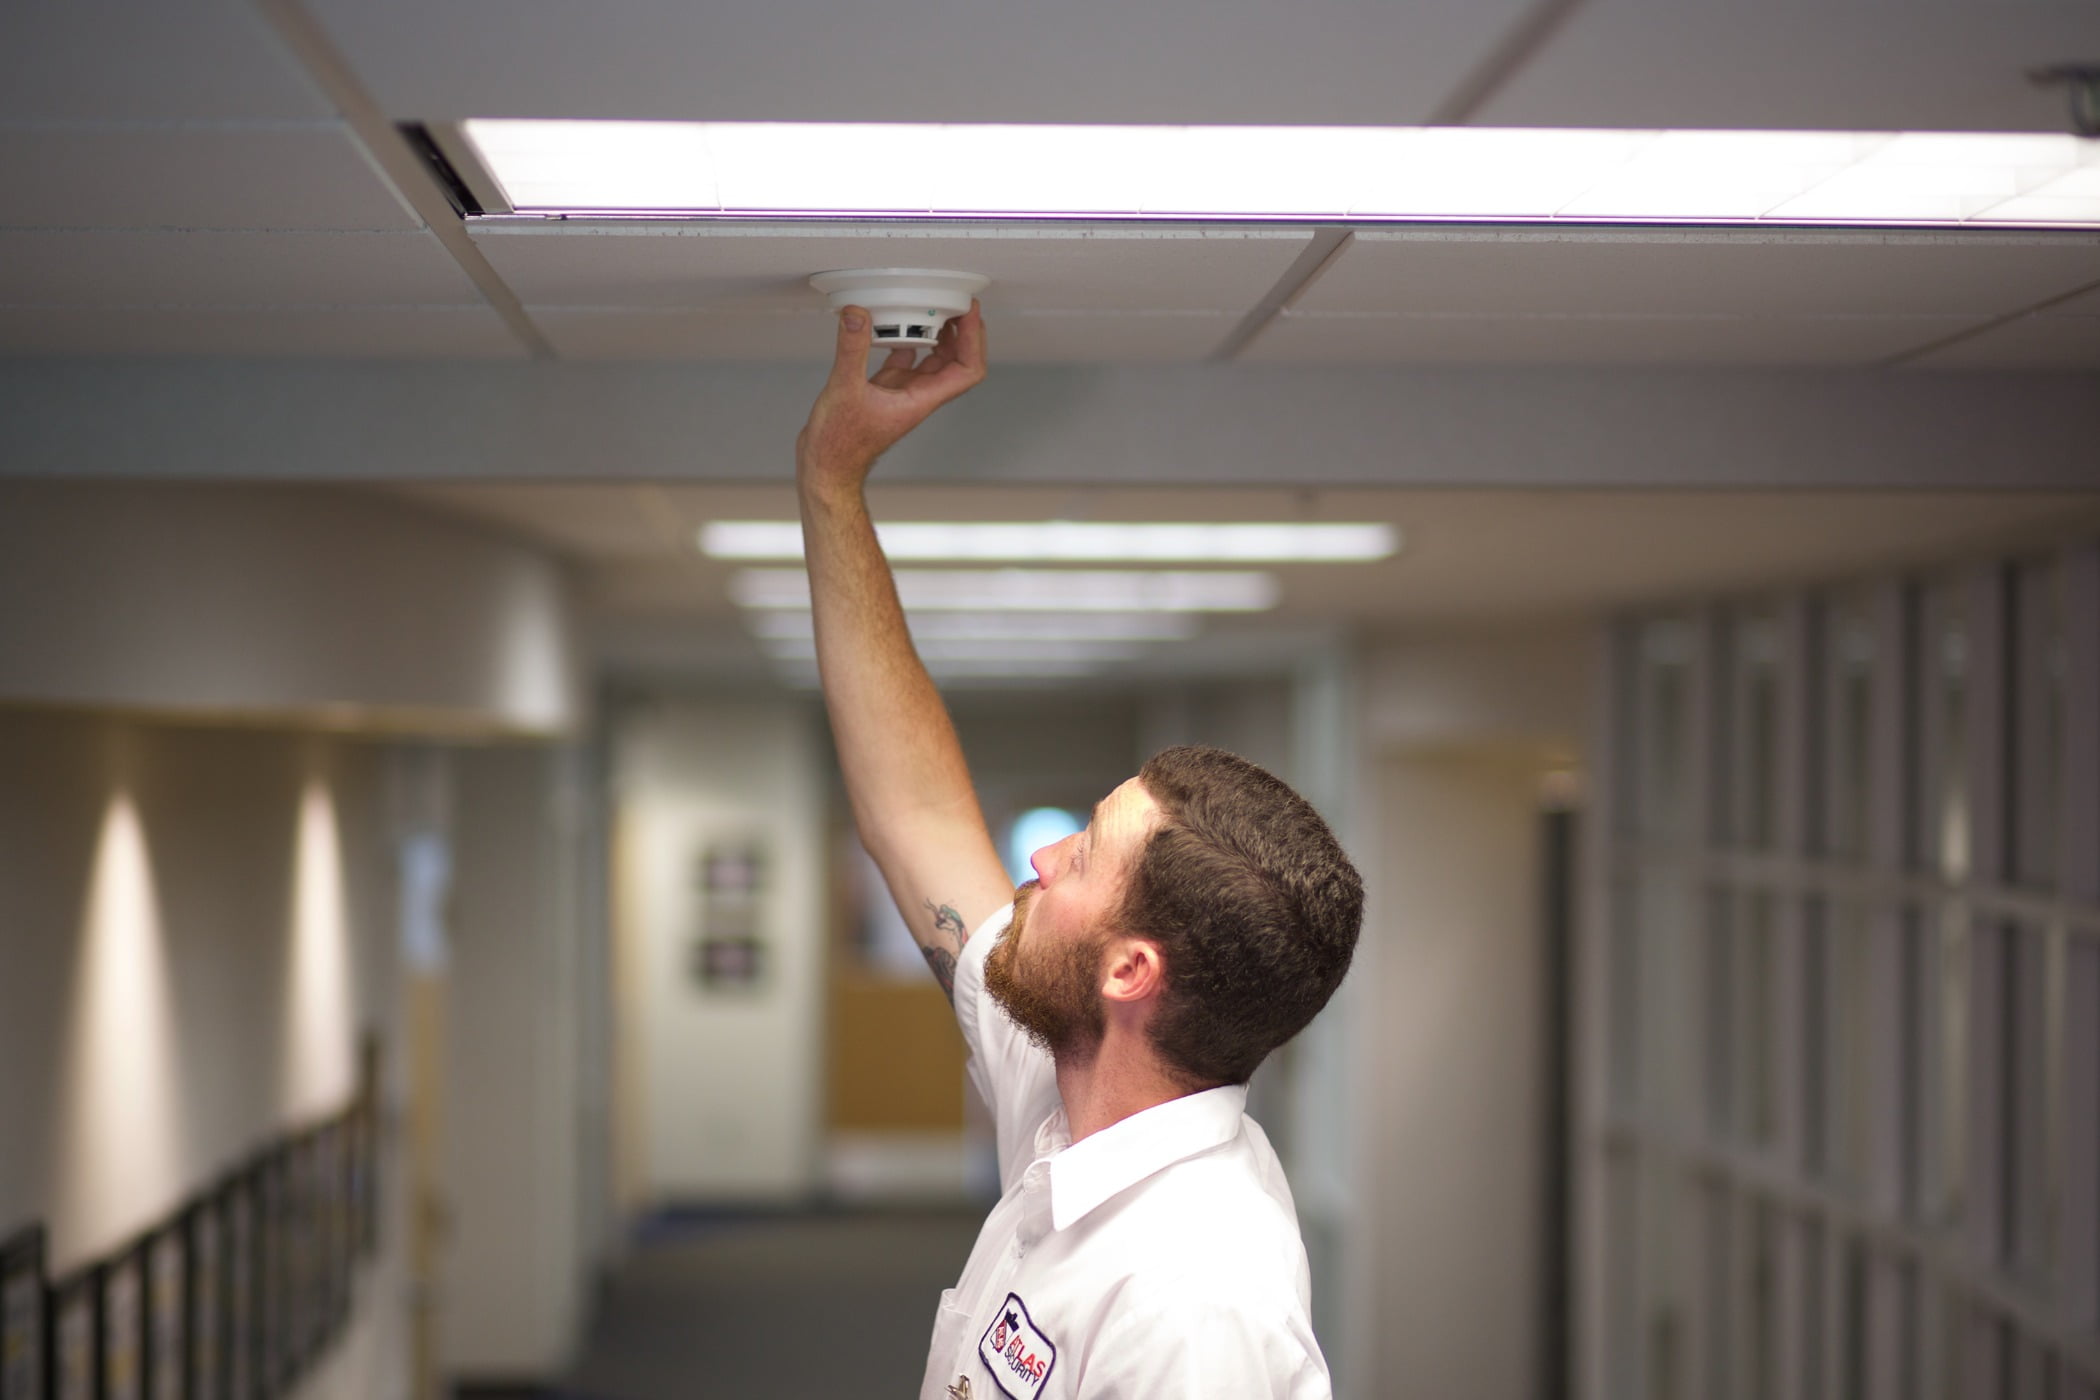 A fire technician replaces a typical smoke detector in a nursing home hallway. 